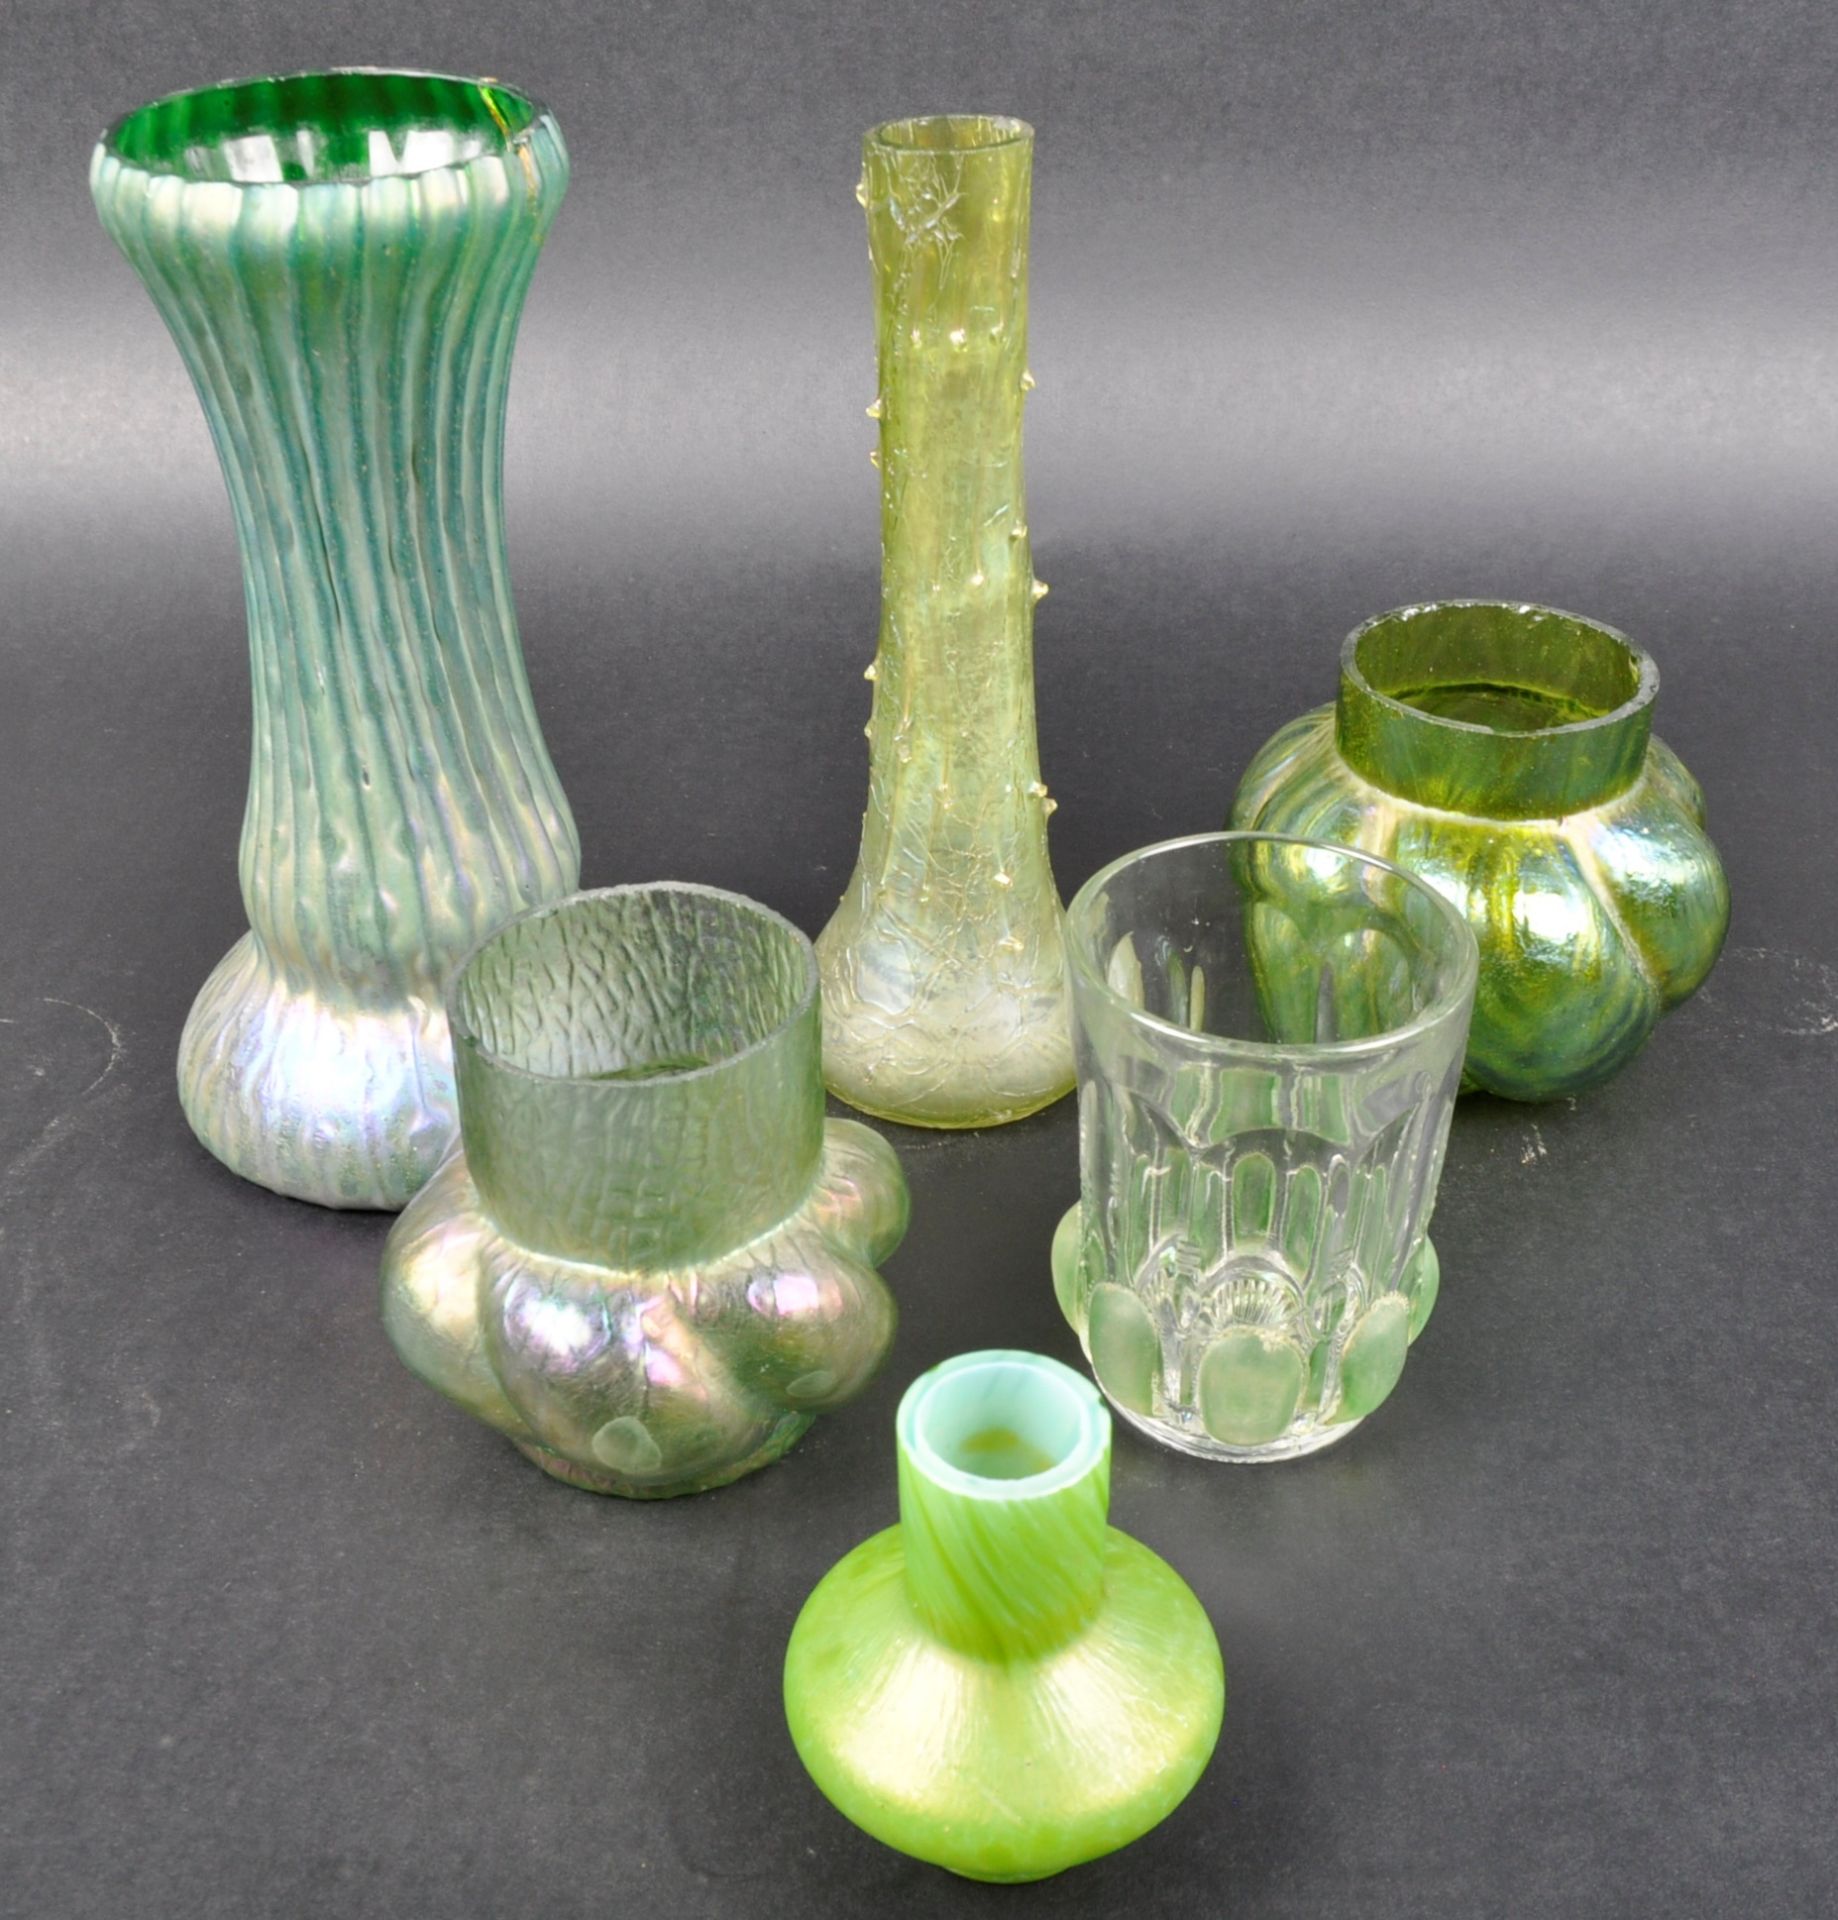 SELECTION OF ART NOUVEAU PEARLESCENT GLASS VASES - Image 2 of 13